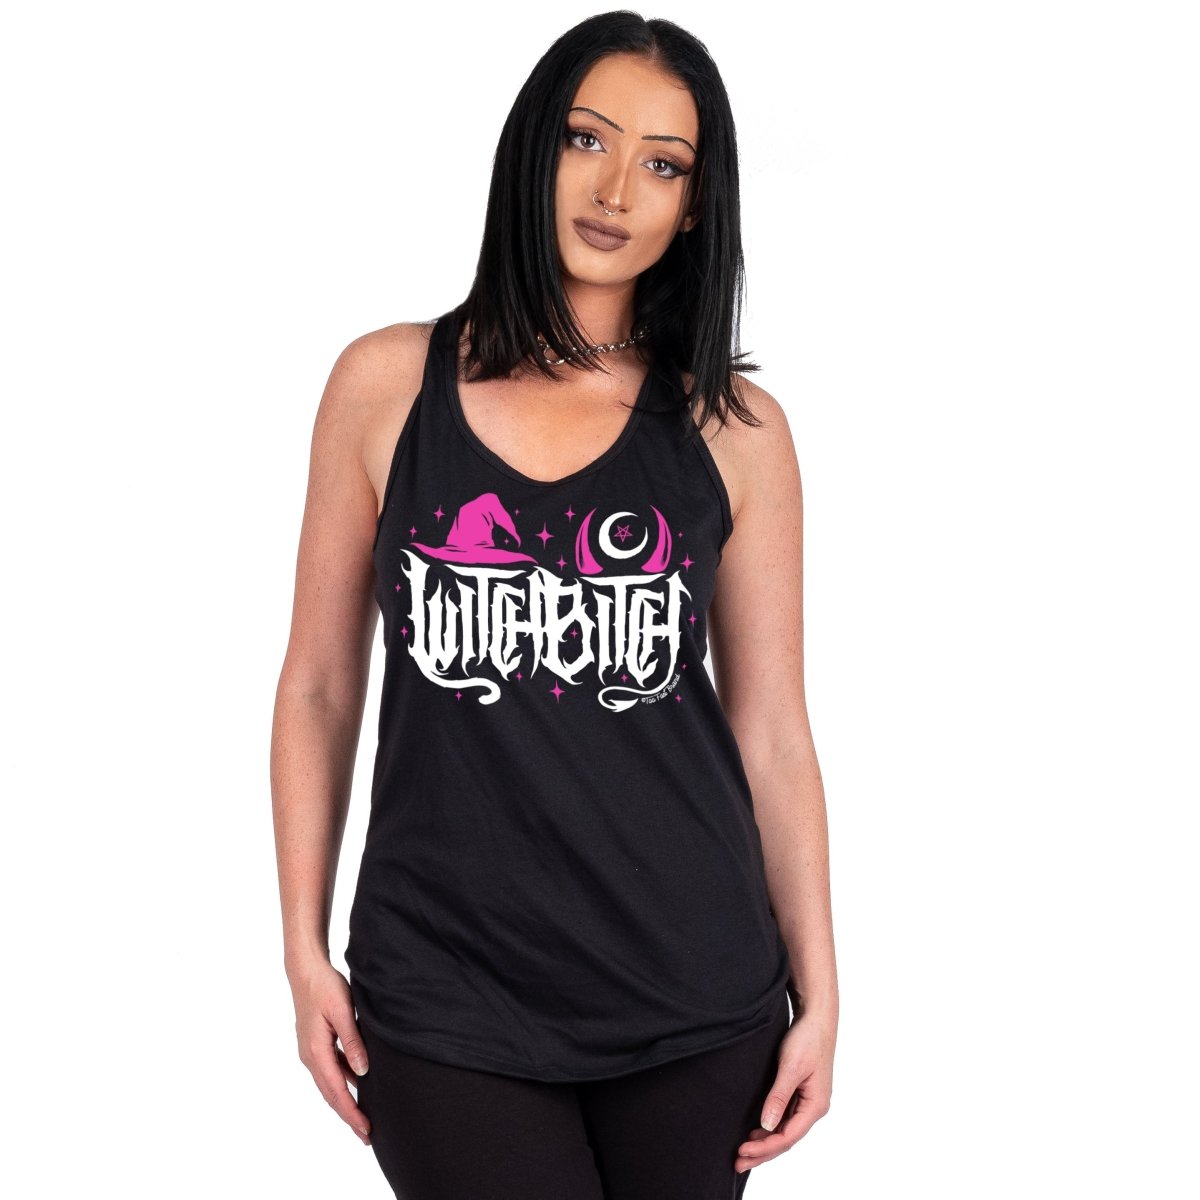 Too Fast | Witch Bitch Racerback Tank Top